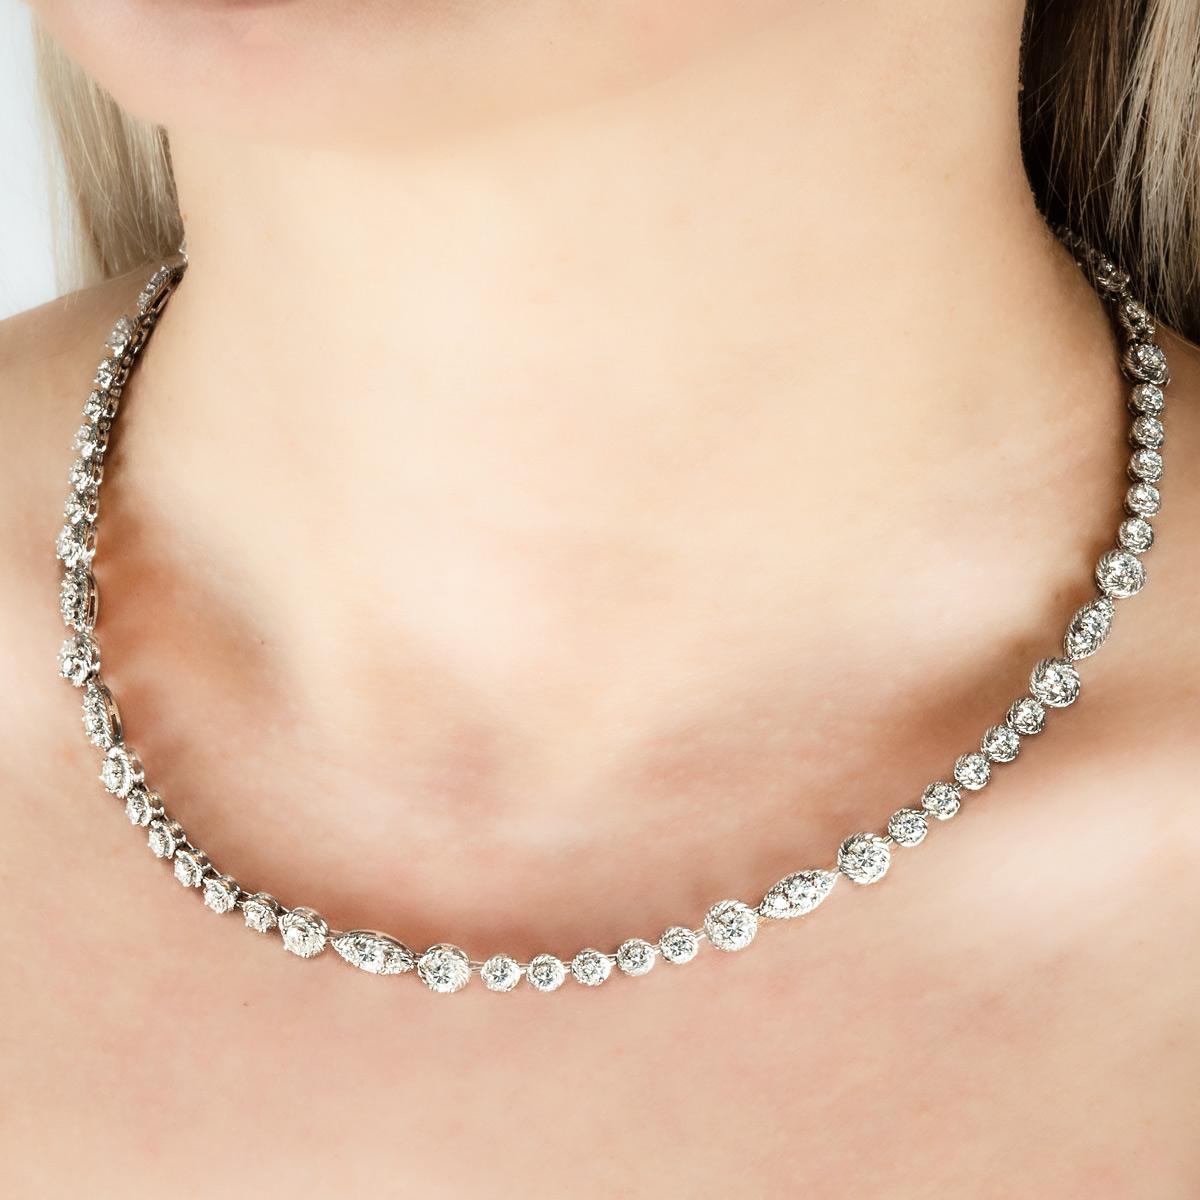 Van Cleef & Arpels Platinum Diamond Choker Necklace 10.00ct TDW In Excellent Condition For Sale In London, GB